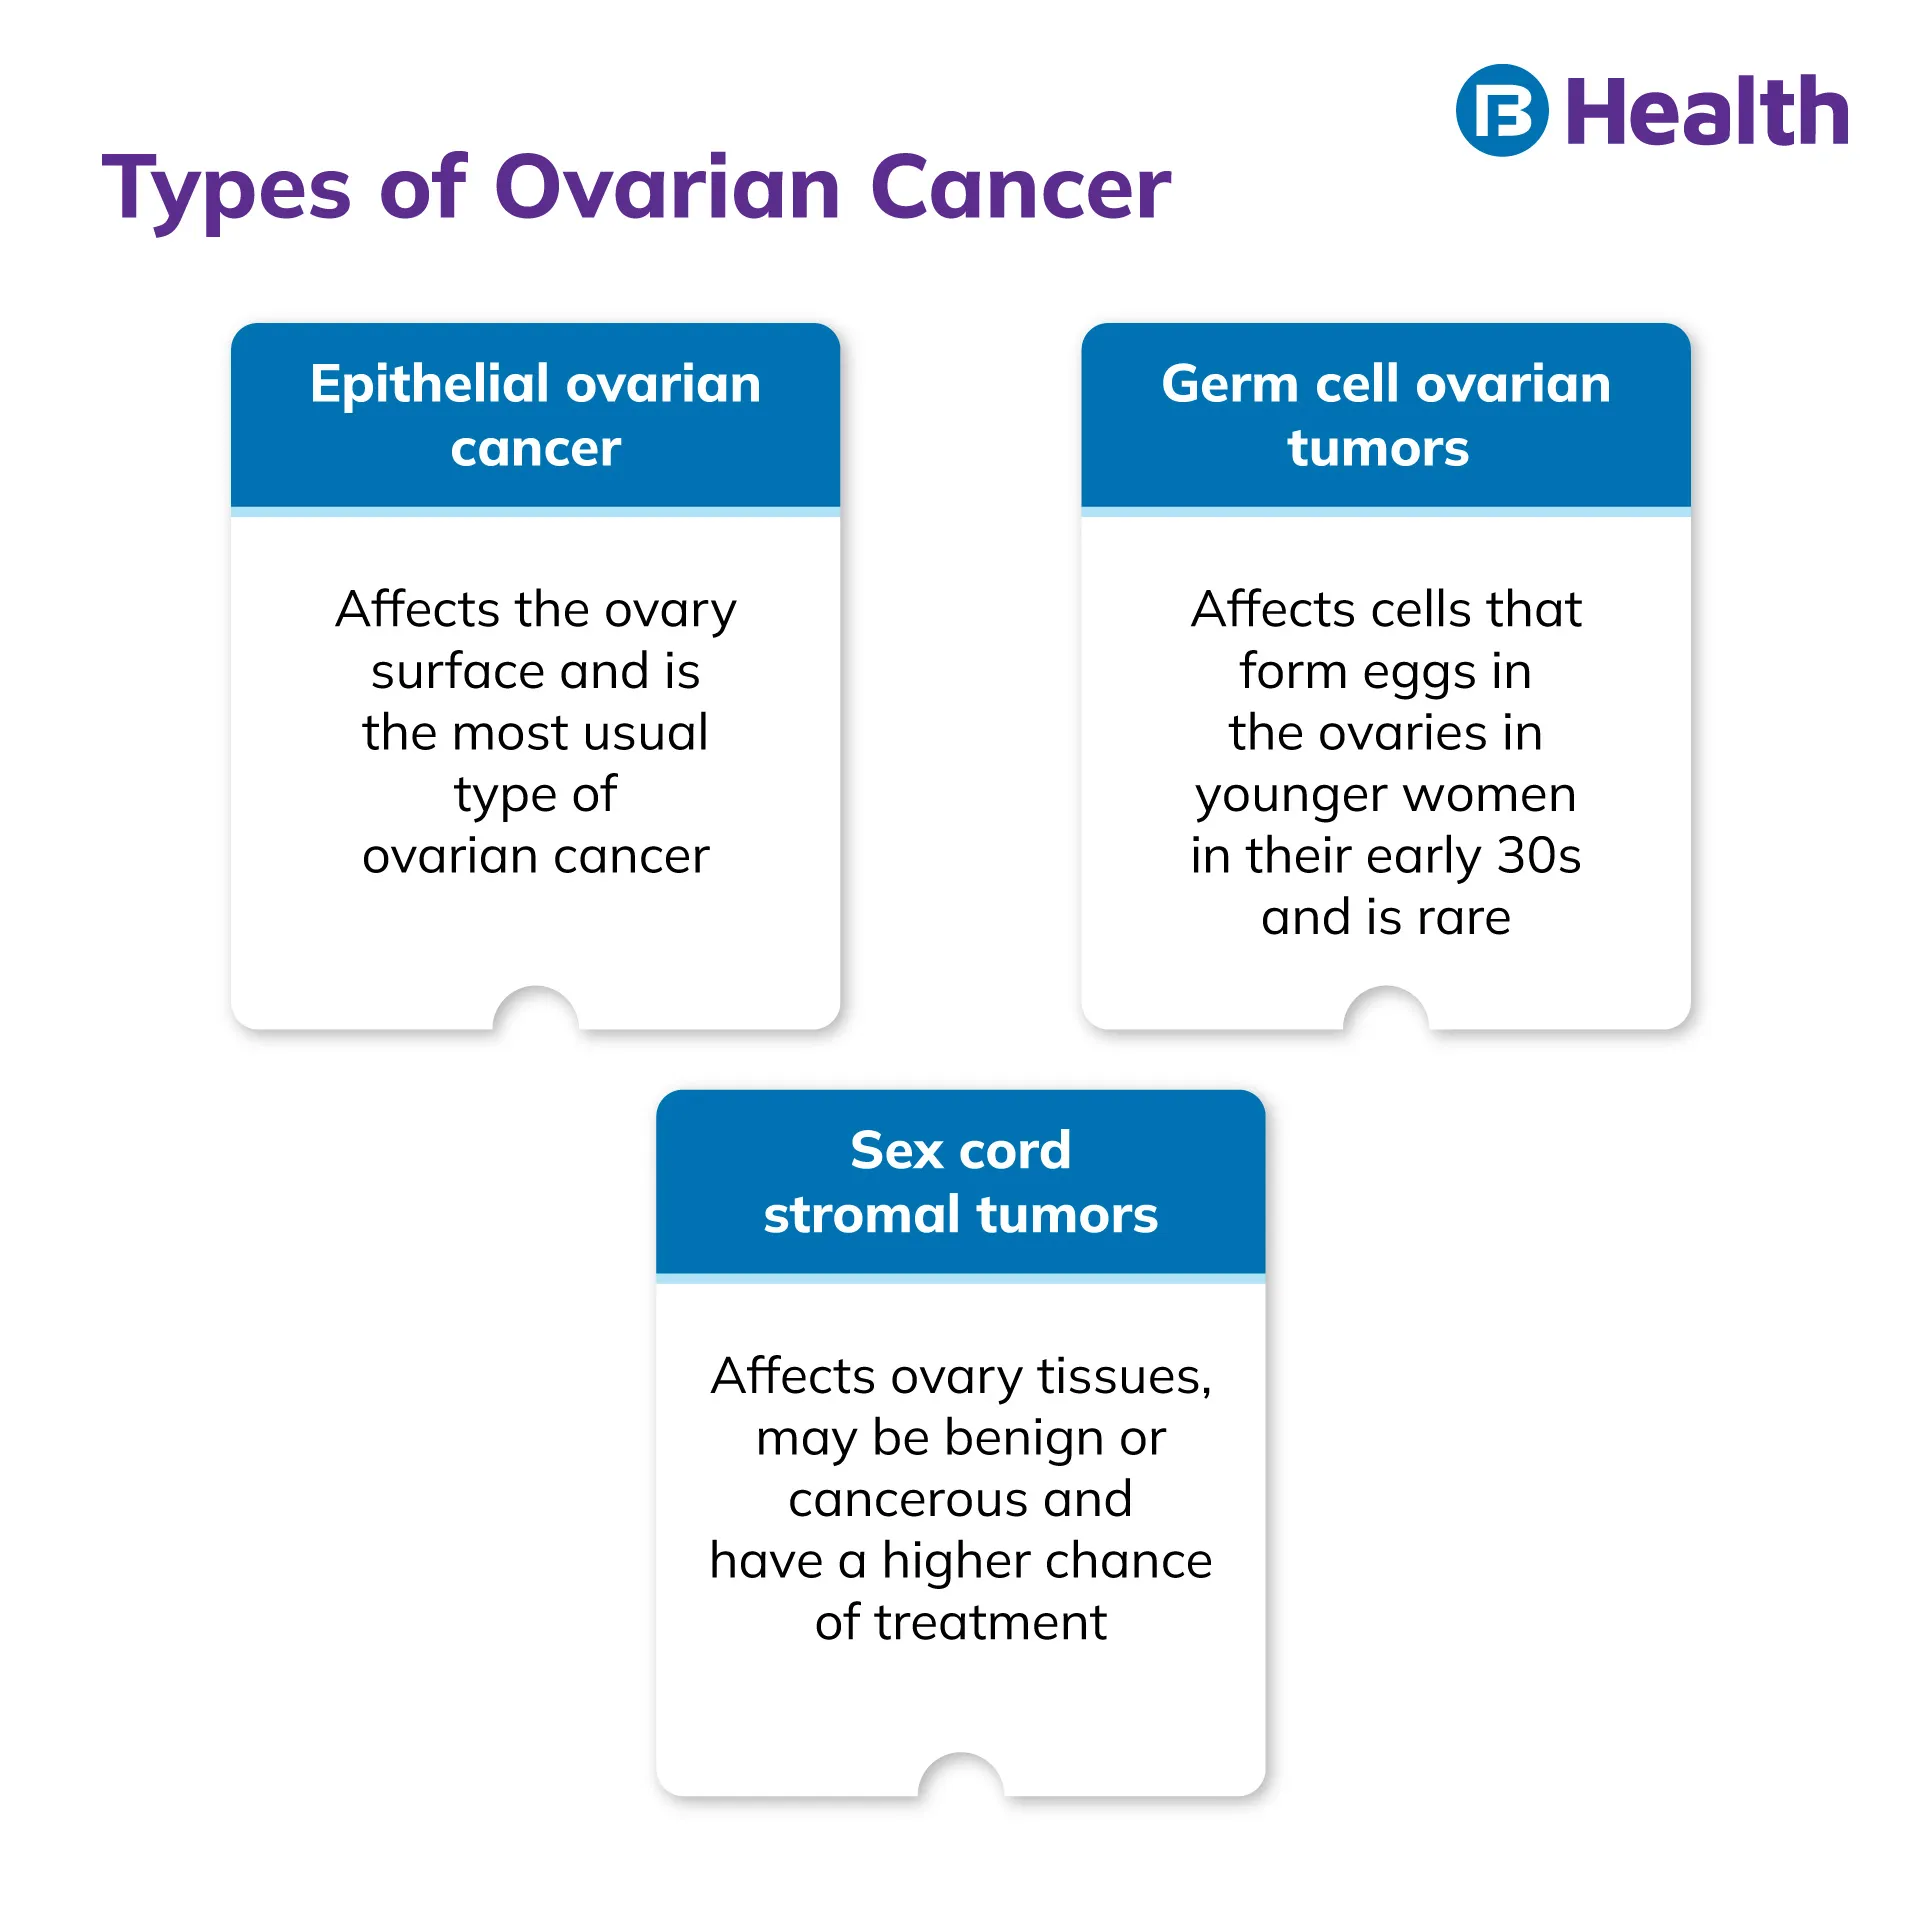 types of Ovarian Cancer